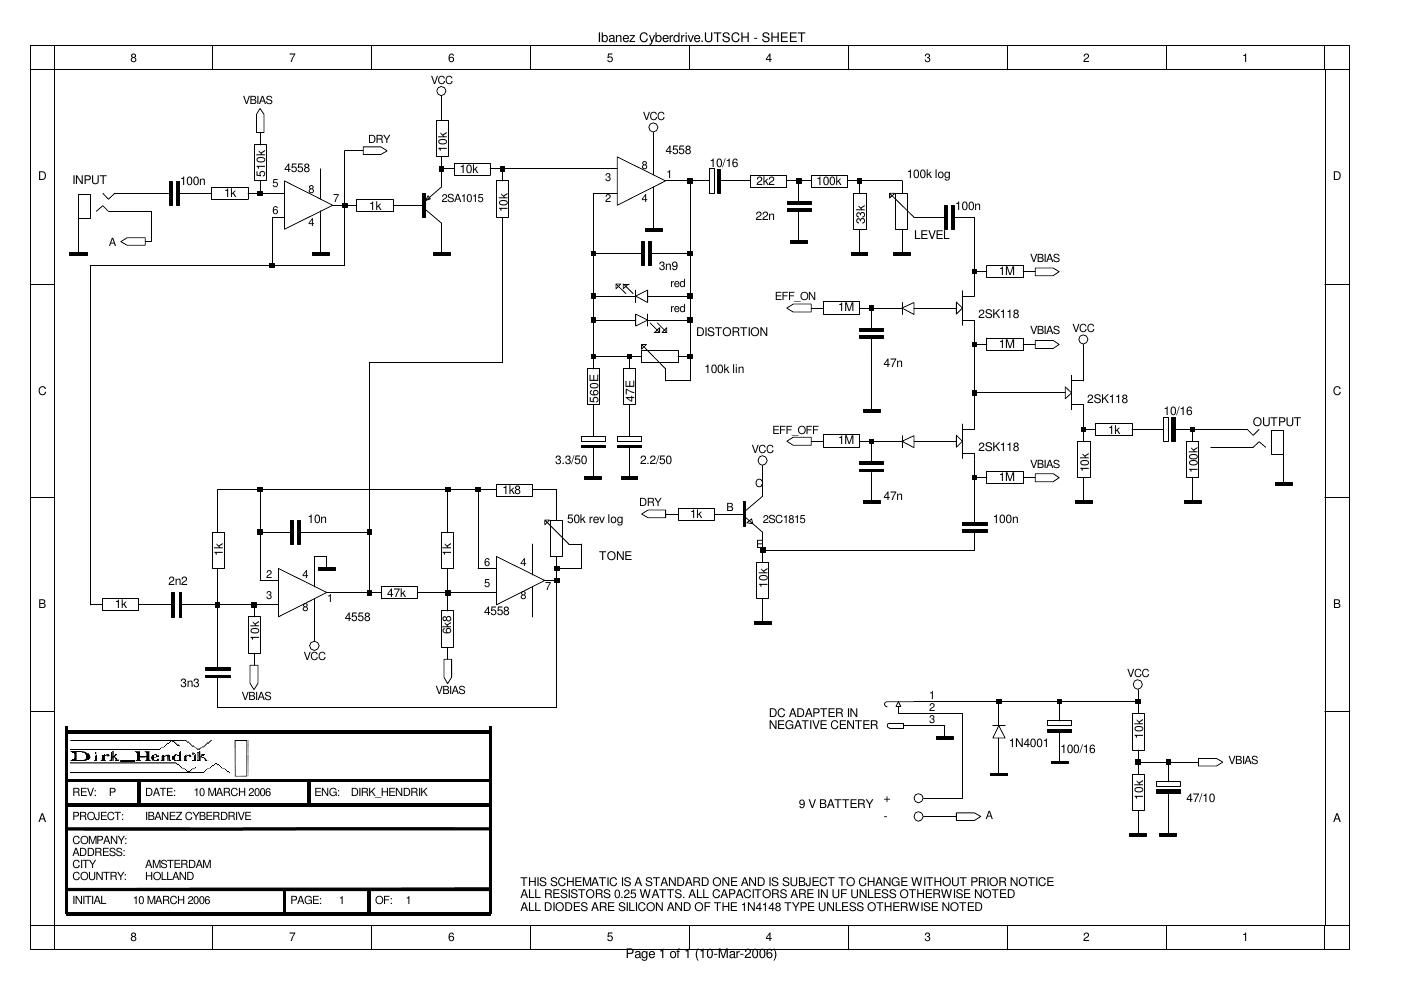 Ibanez CD 5 Cyberdrive Schematic